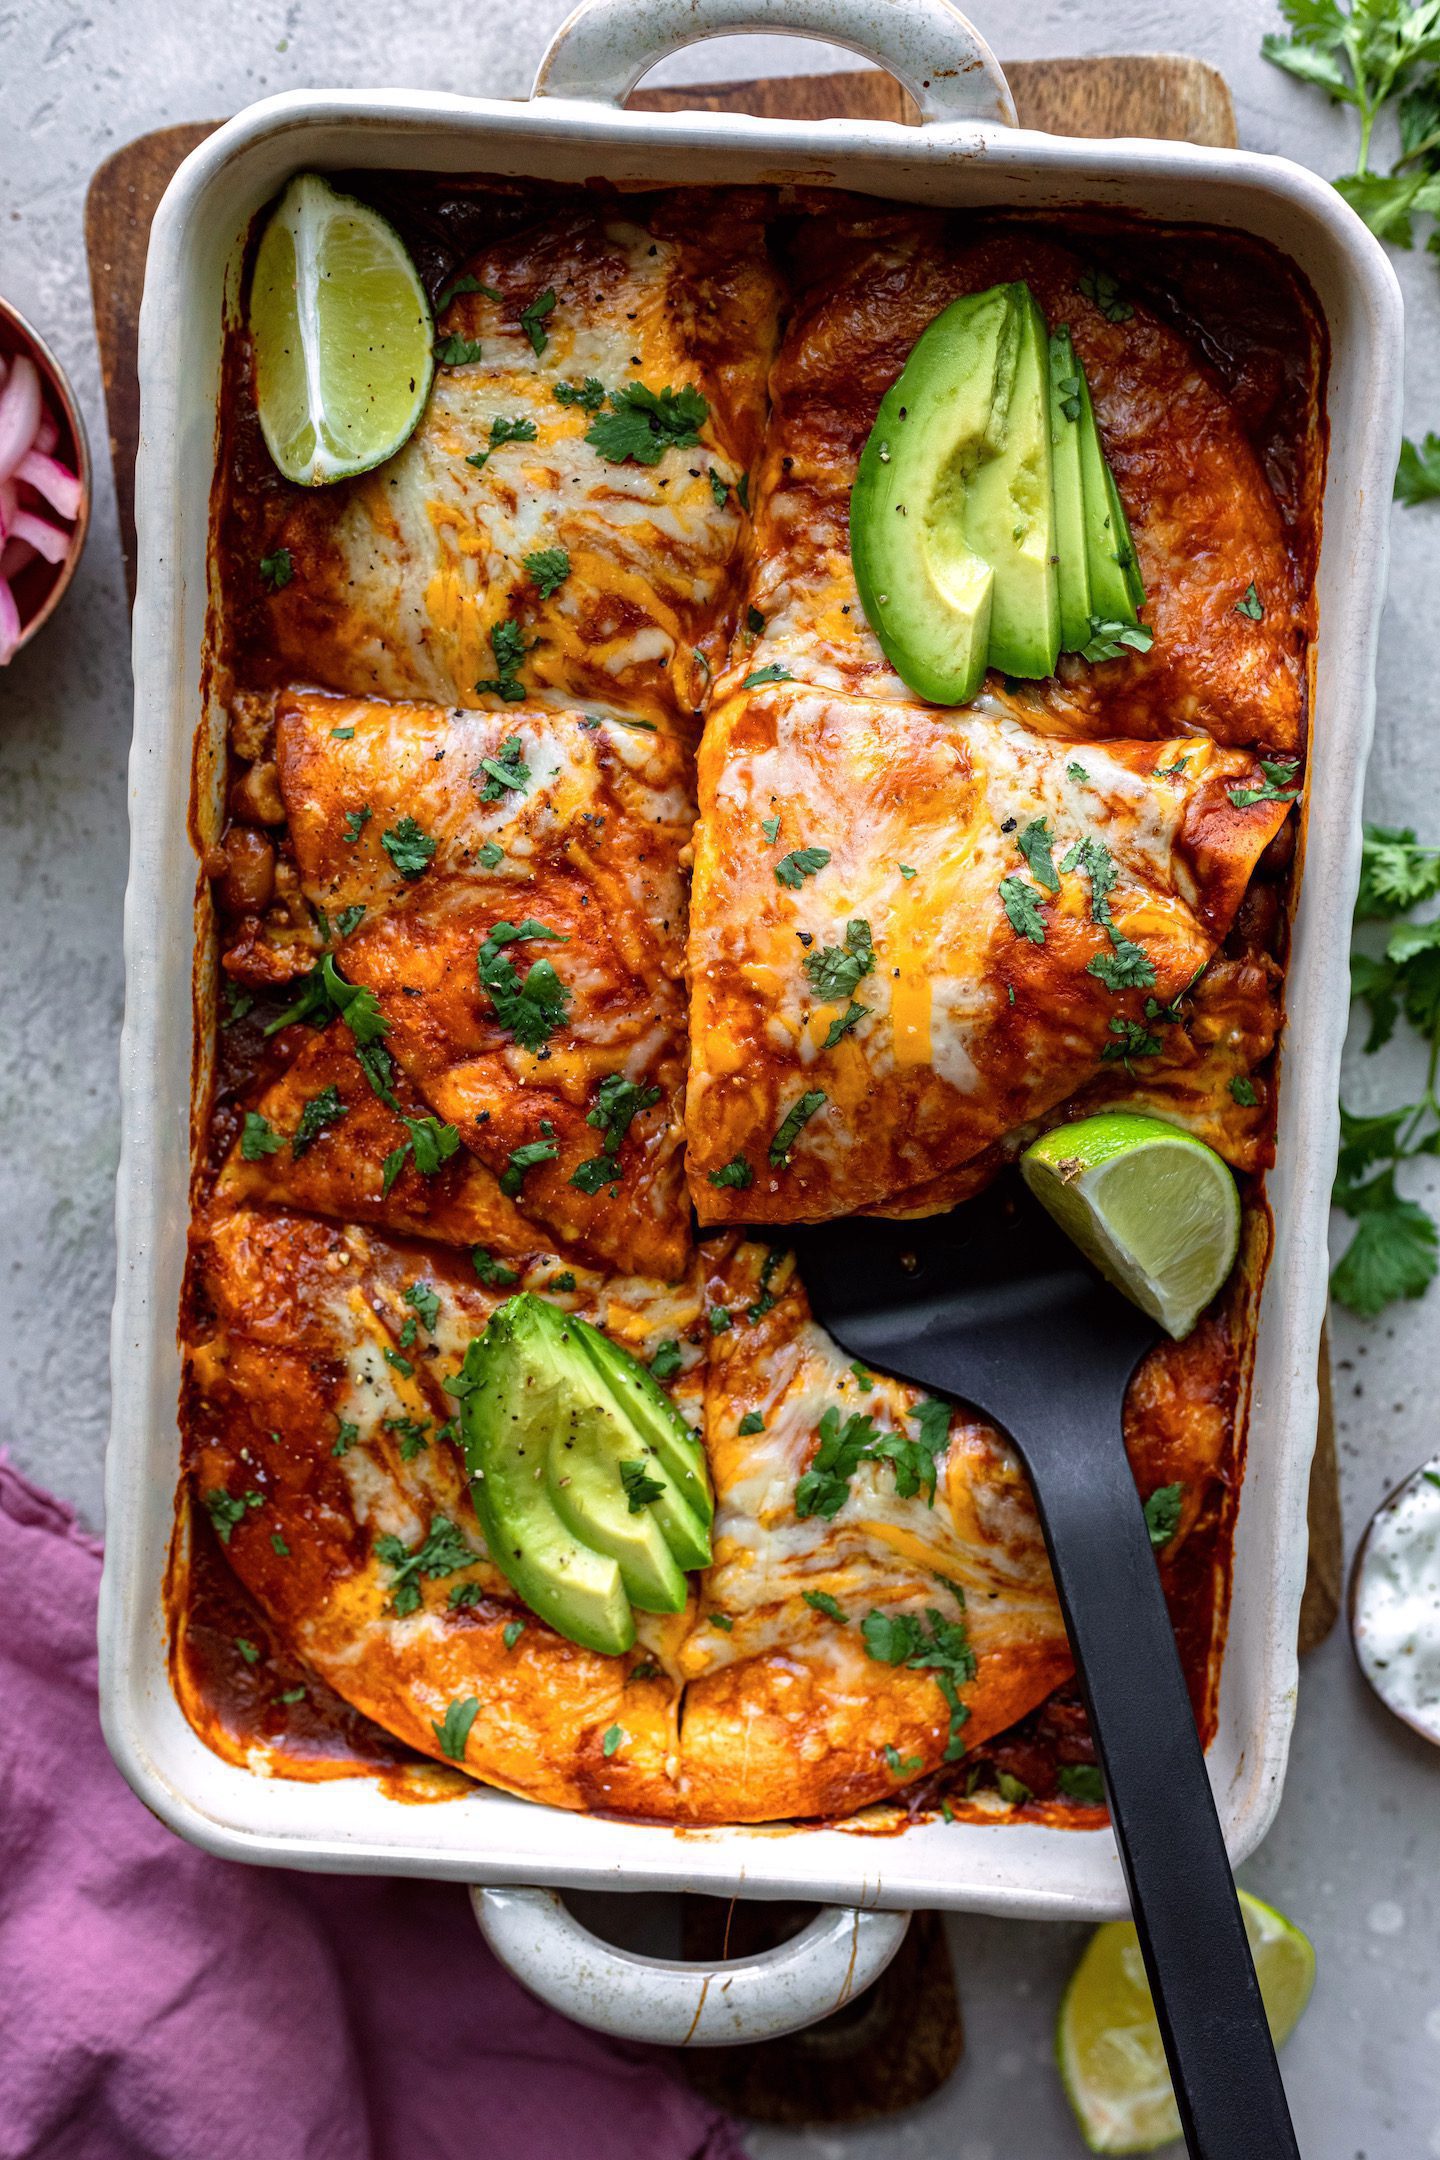 Overhead photo of an enchilada casserole cut into slices and garnished with lime wedges and sliced avocado.